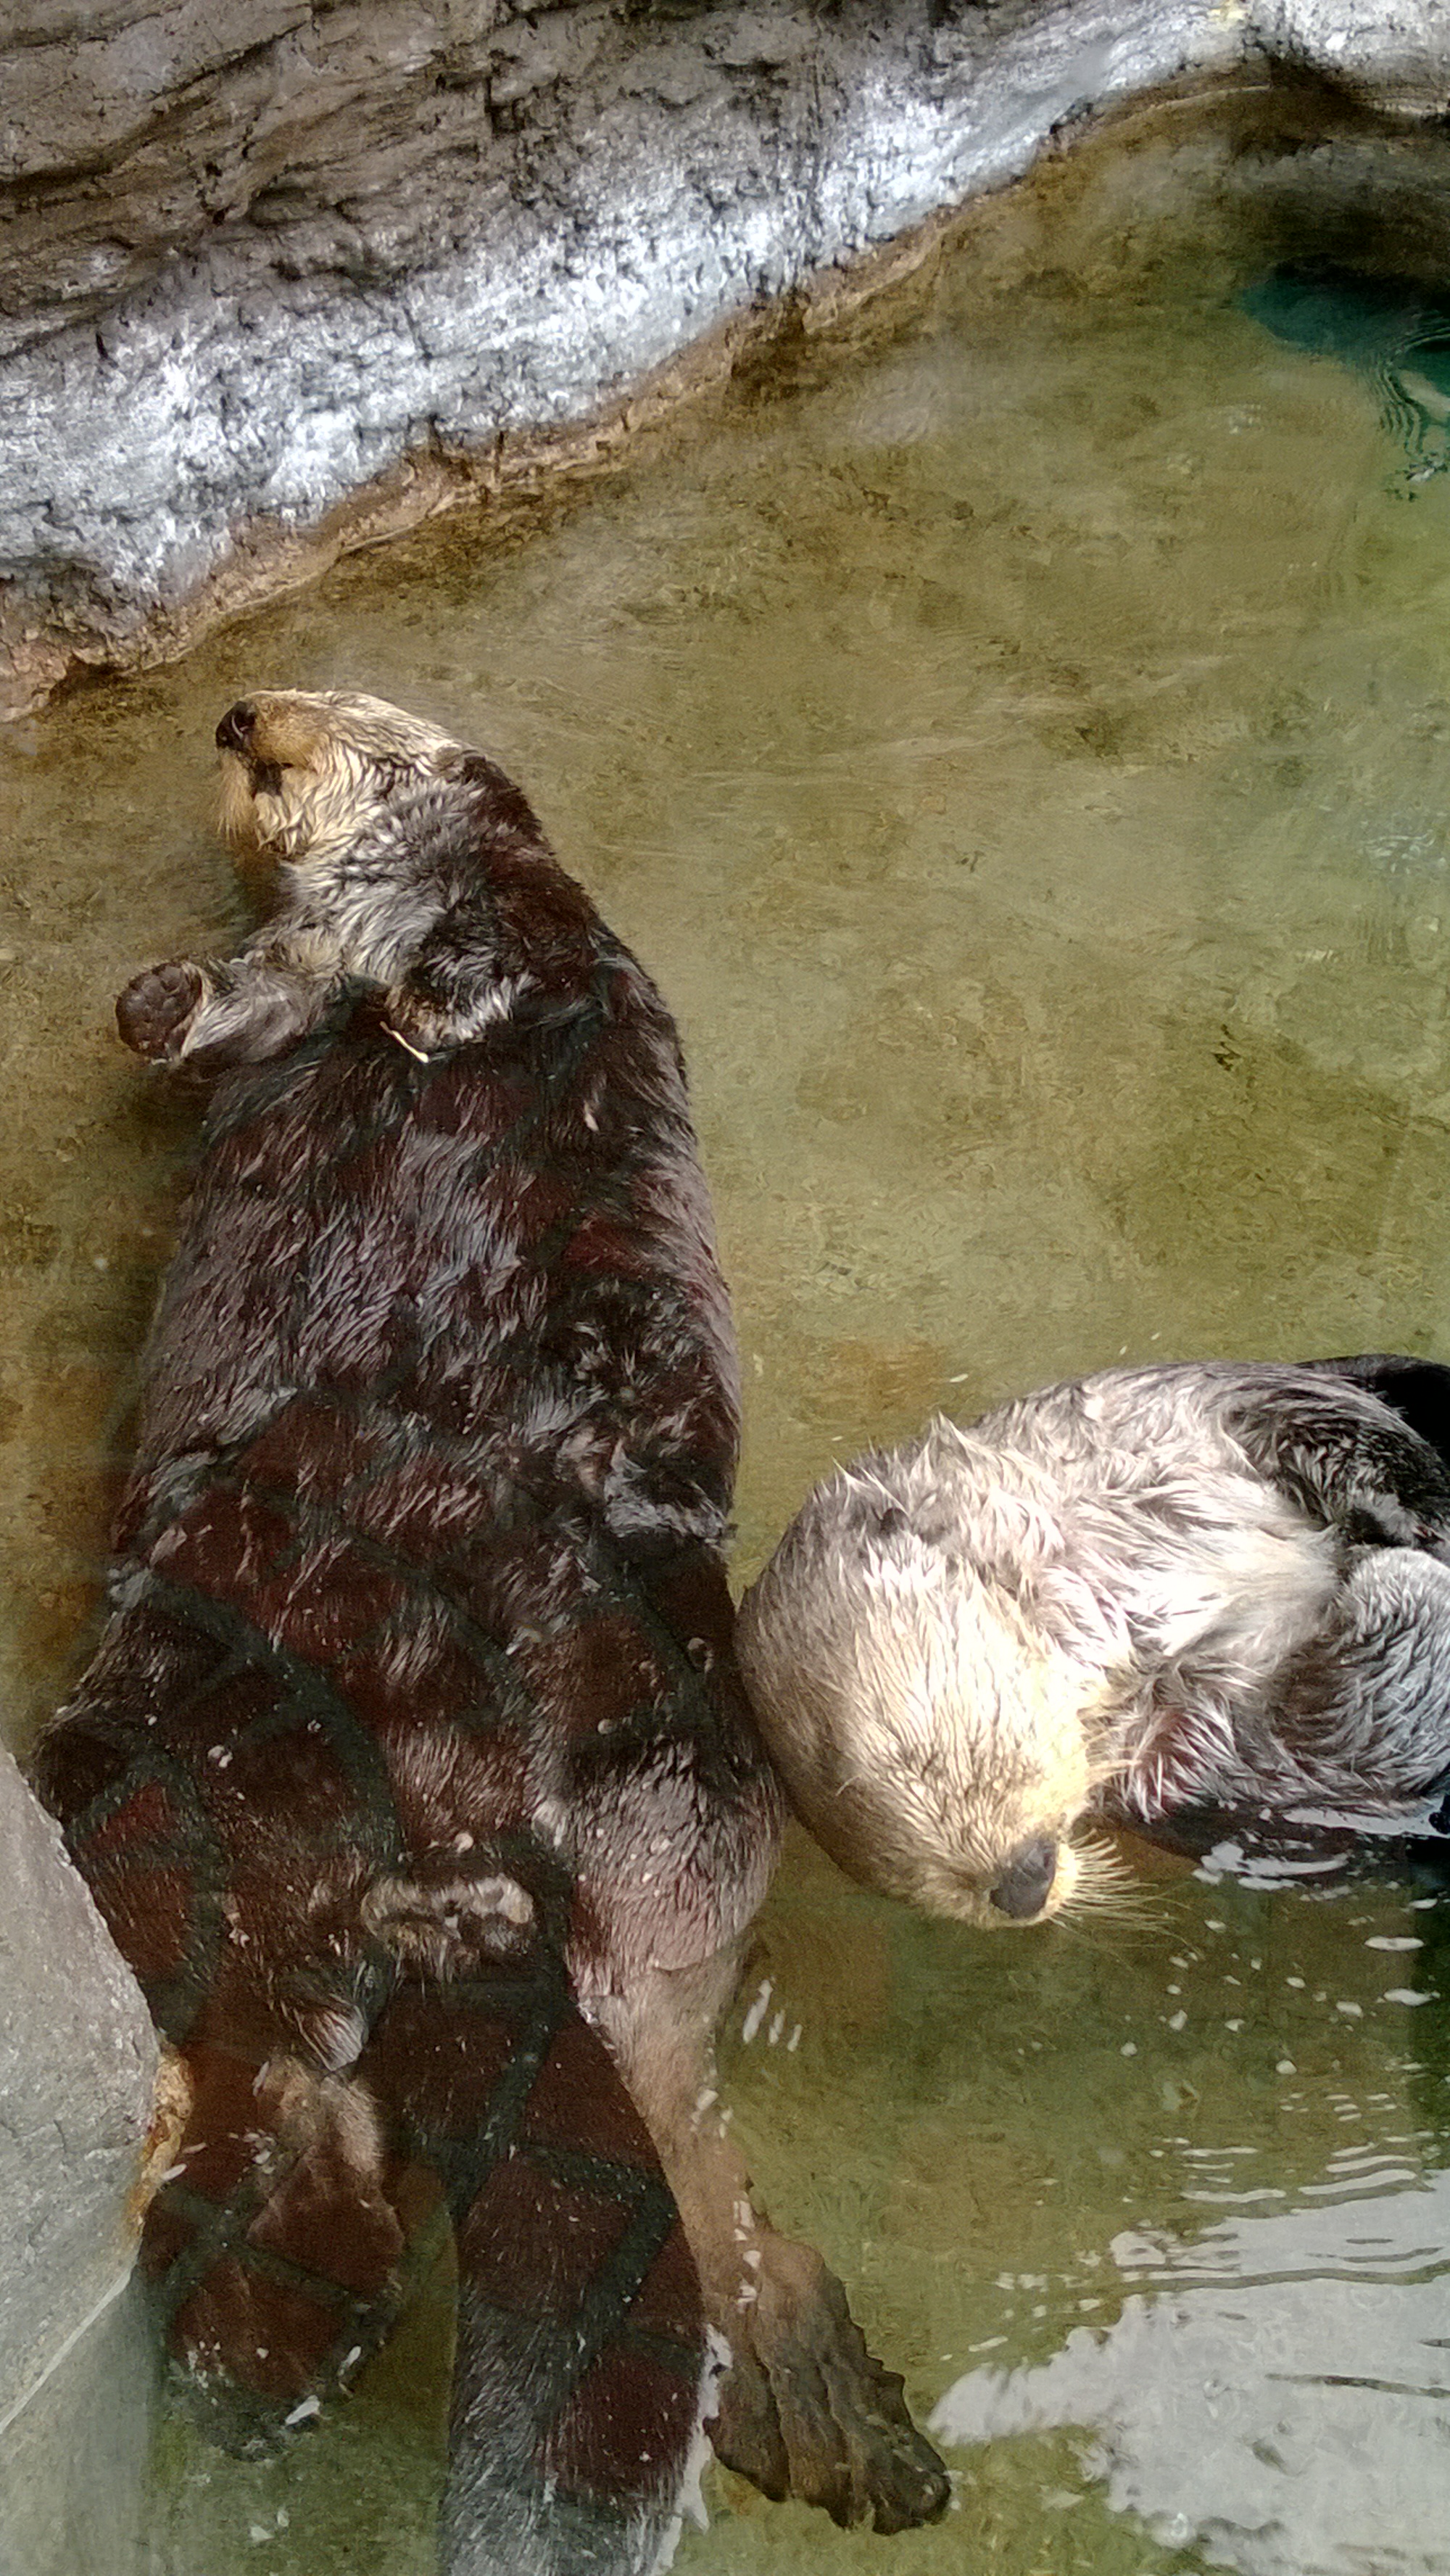 Snoozing Sea Otters Are Oblivious to Their Audience